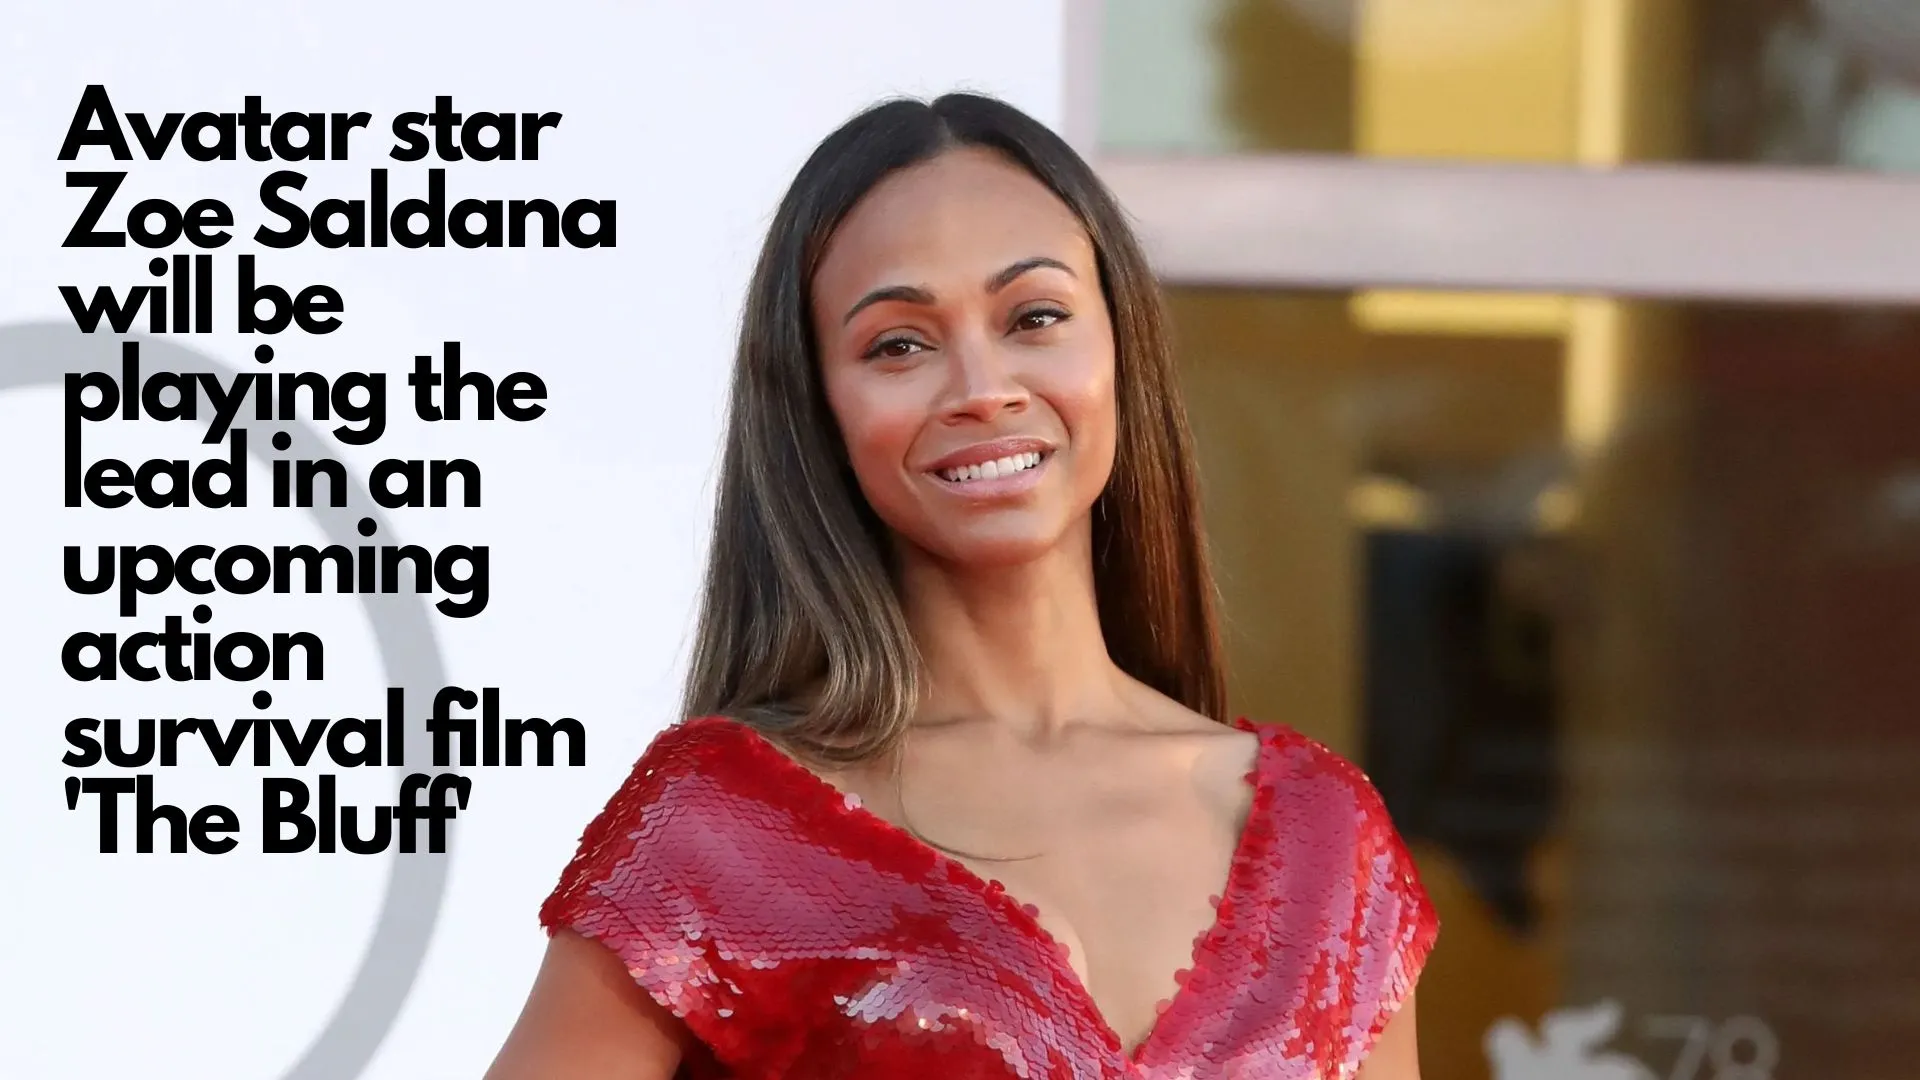 Avatar star Zoe Saldana will be playing the lead in an upcoming action survival film 'The Bluff' (Image credit: celebwell)